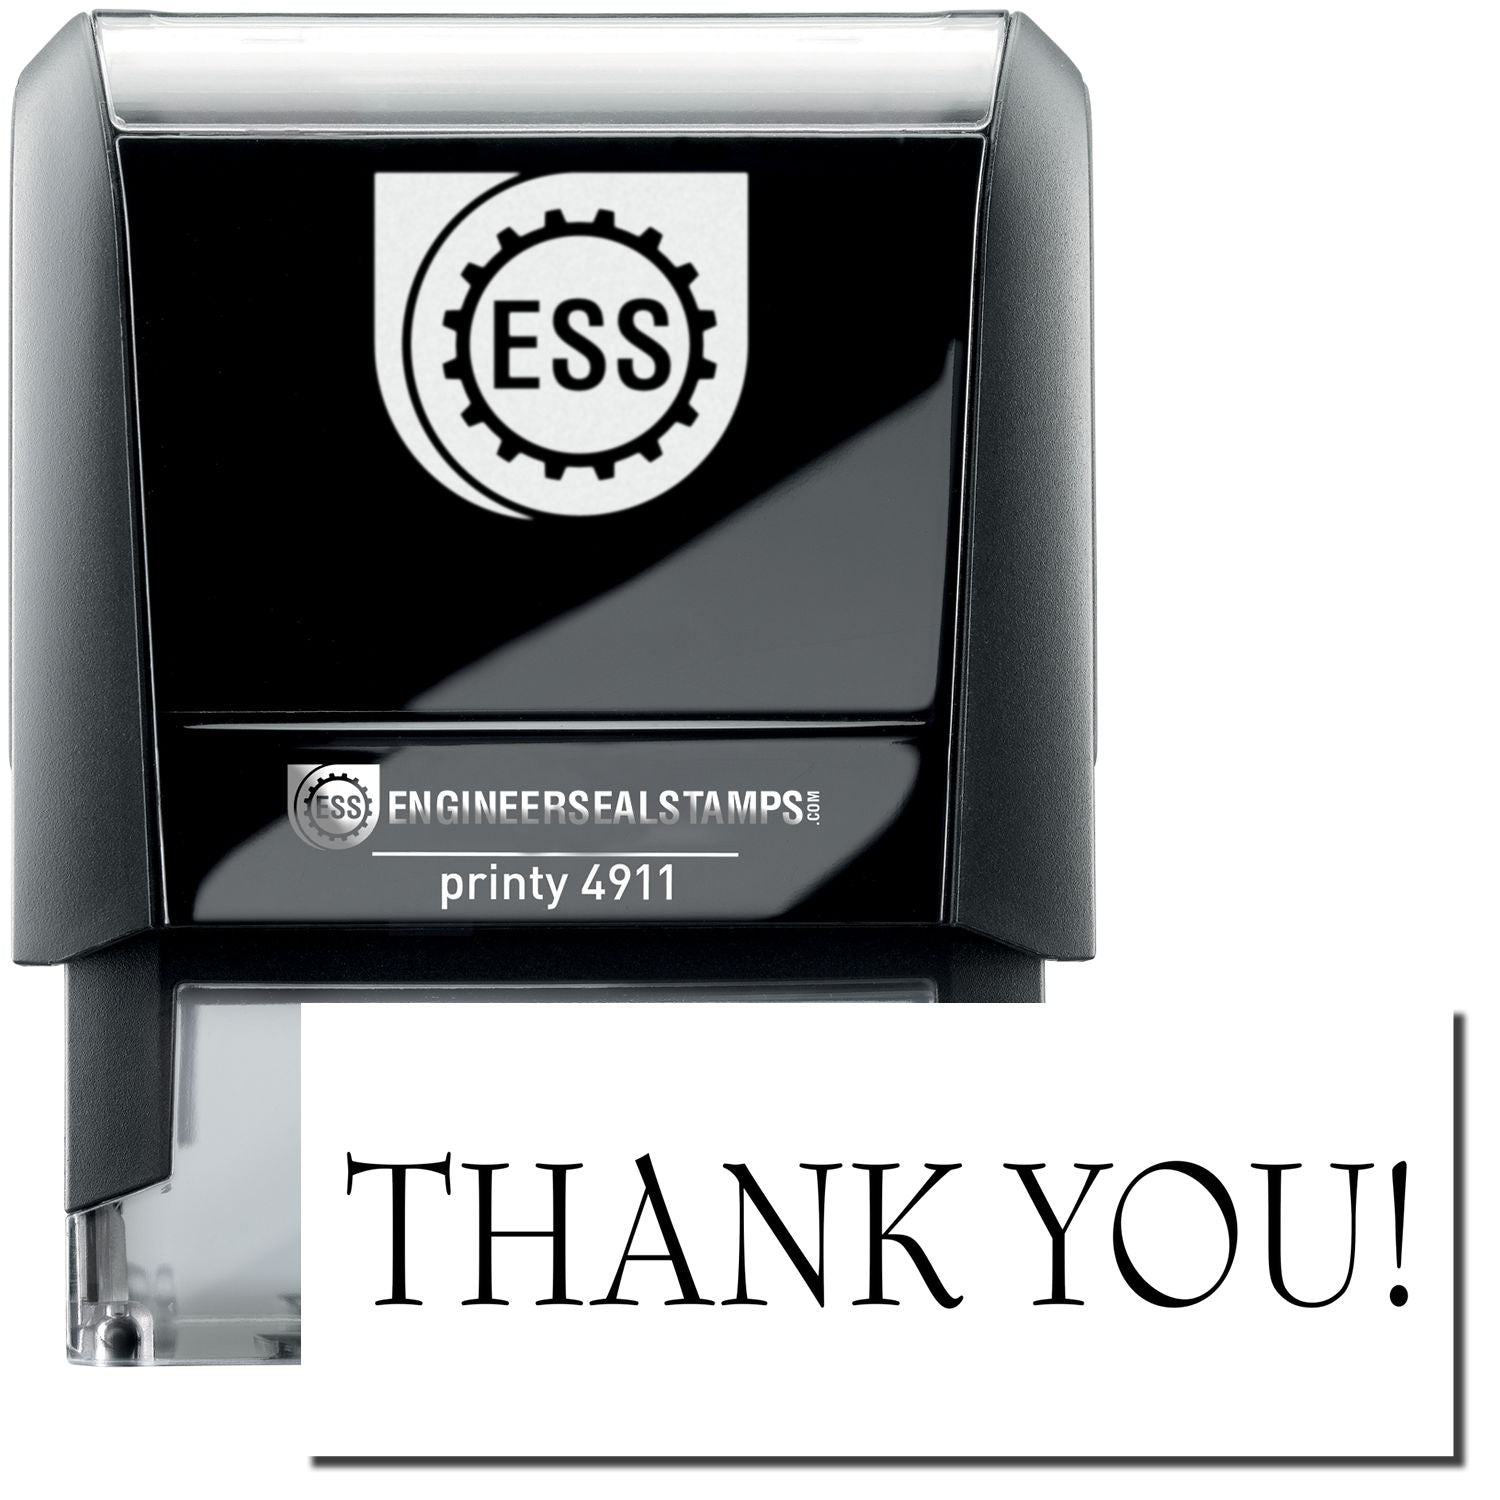 A self-inking stamp with a stamped image showing how the text "THANK YOU!" is displayed after stamping.